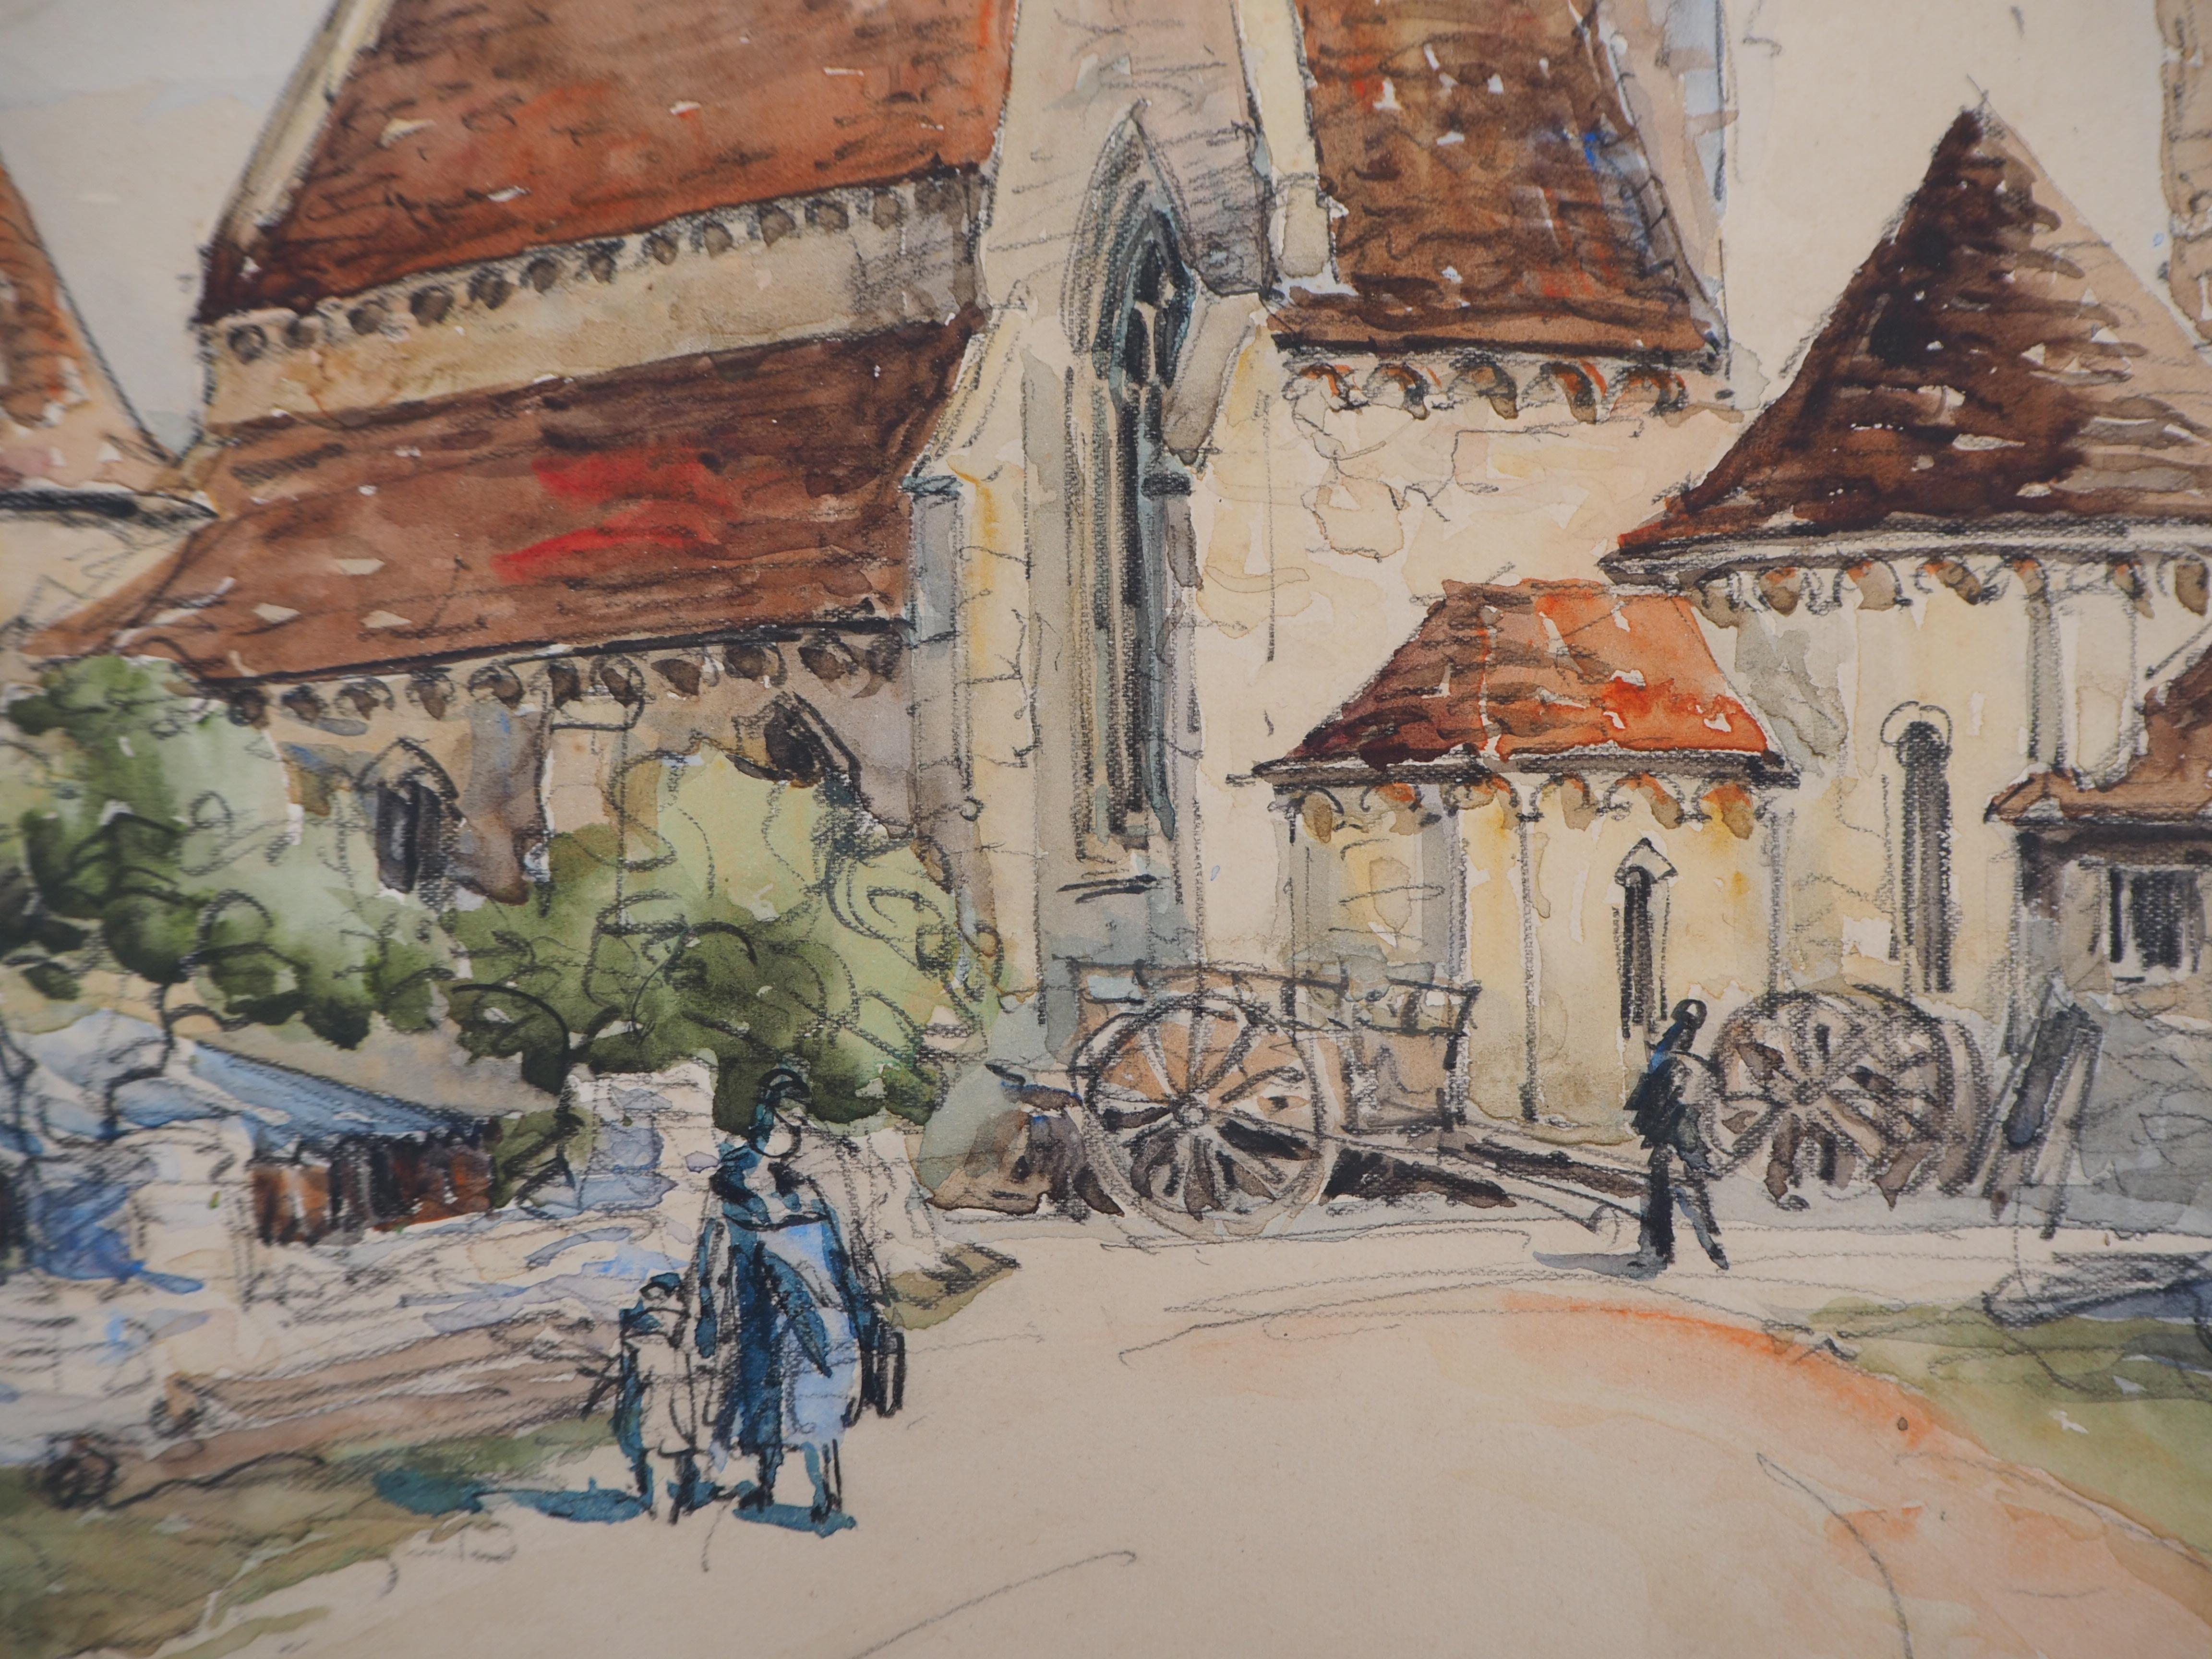 Frank WILL
Burgundy : The Roman Church of Druyes 

Original watercolor
Handsigned bottom left
Dated 1944
On paper 42 x 50 cm (c. 17 x 20 inch)

Excellent condition, minor defects at the edge of the sheet